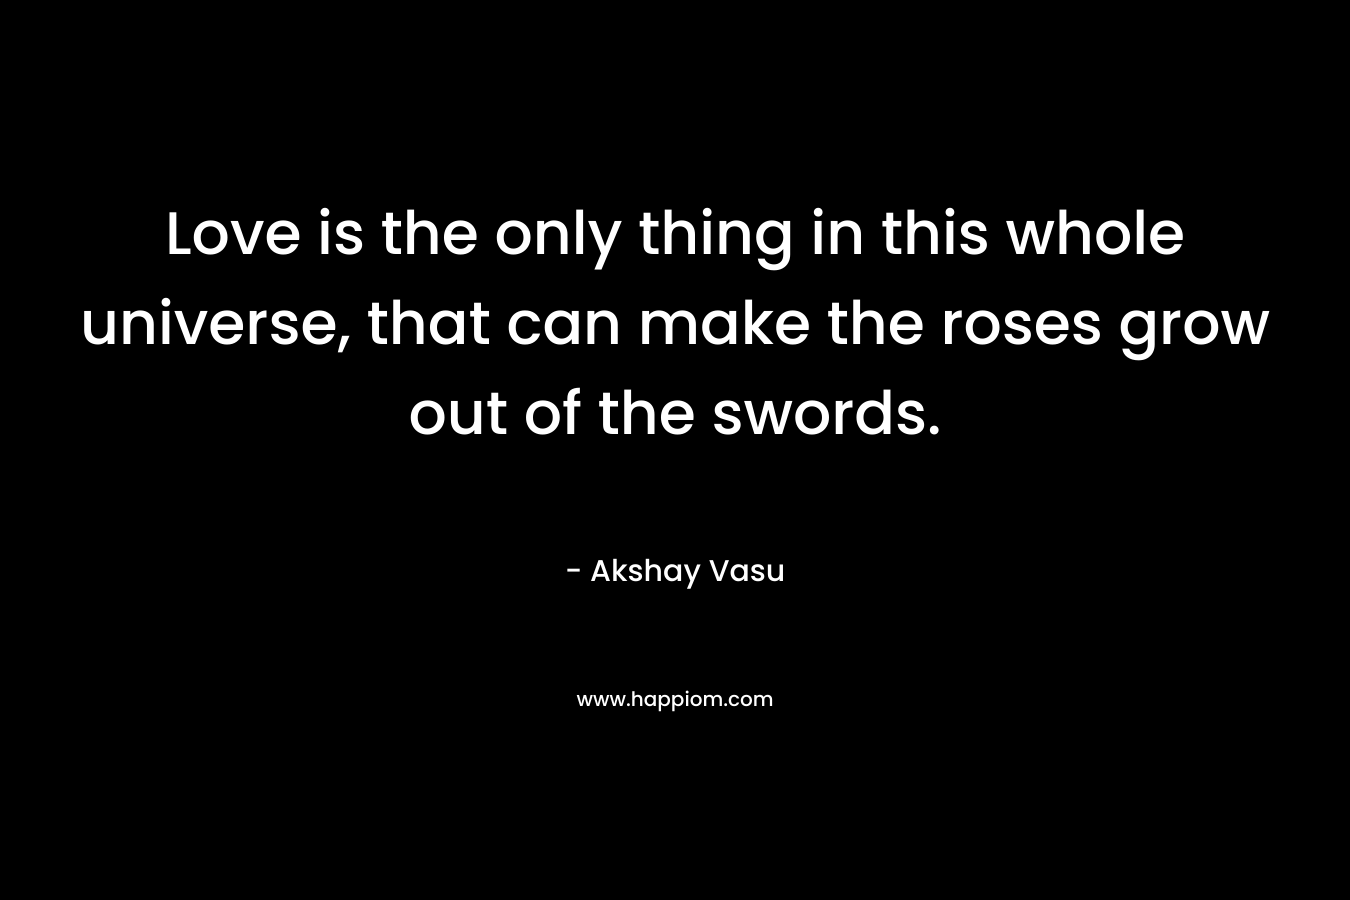 Love is the only thing in this whole universe, that can make the roses grow out of the swords.